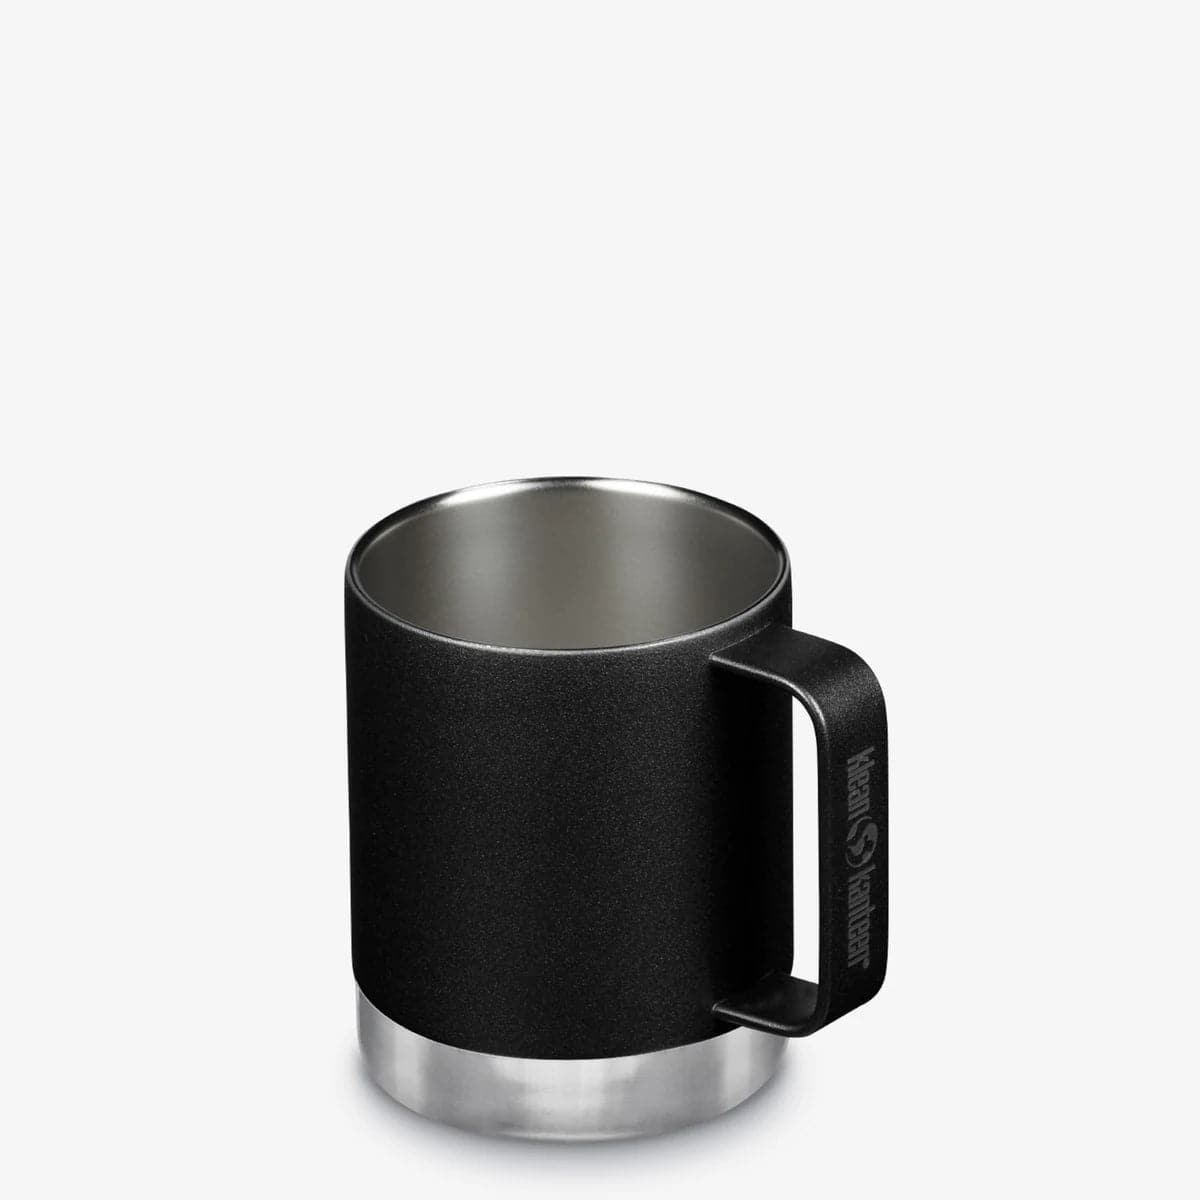 Featuring the Camp Mug - 12oz camp cup, coffee cup, coffee mug, gift for kayaker, gift for paddle boader, gift for rafter, gifts for her, gifts for him, kitchen manufactured by Klean Kanteen shown here from a second angle.